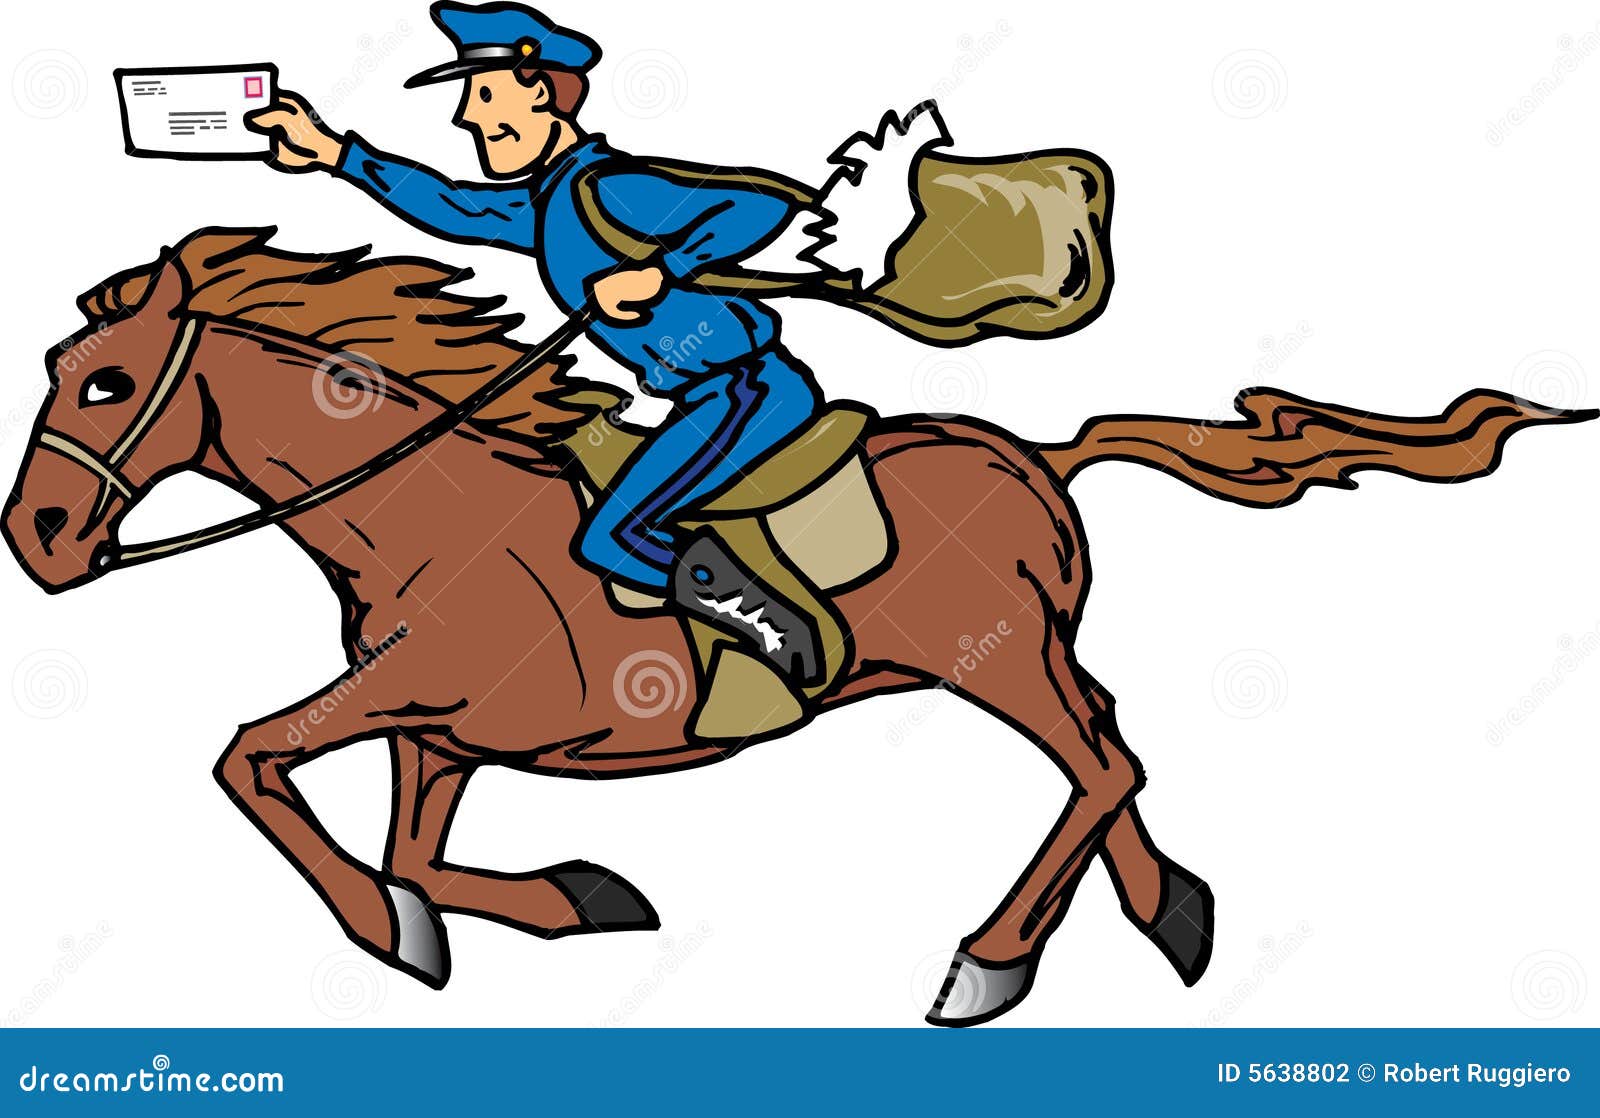 express delivery clipart - photo #46